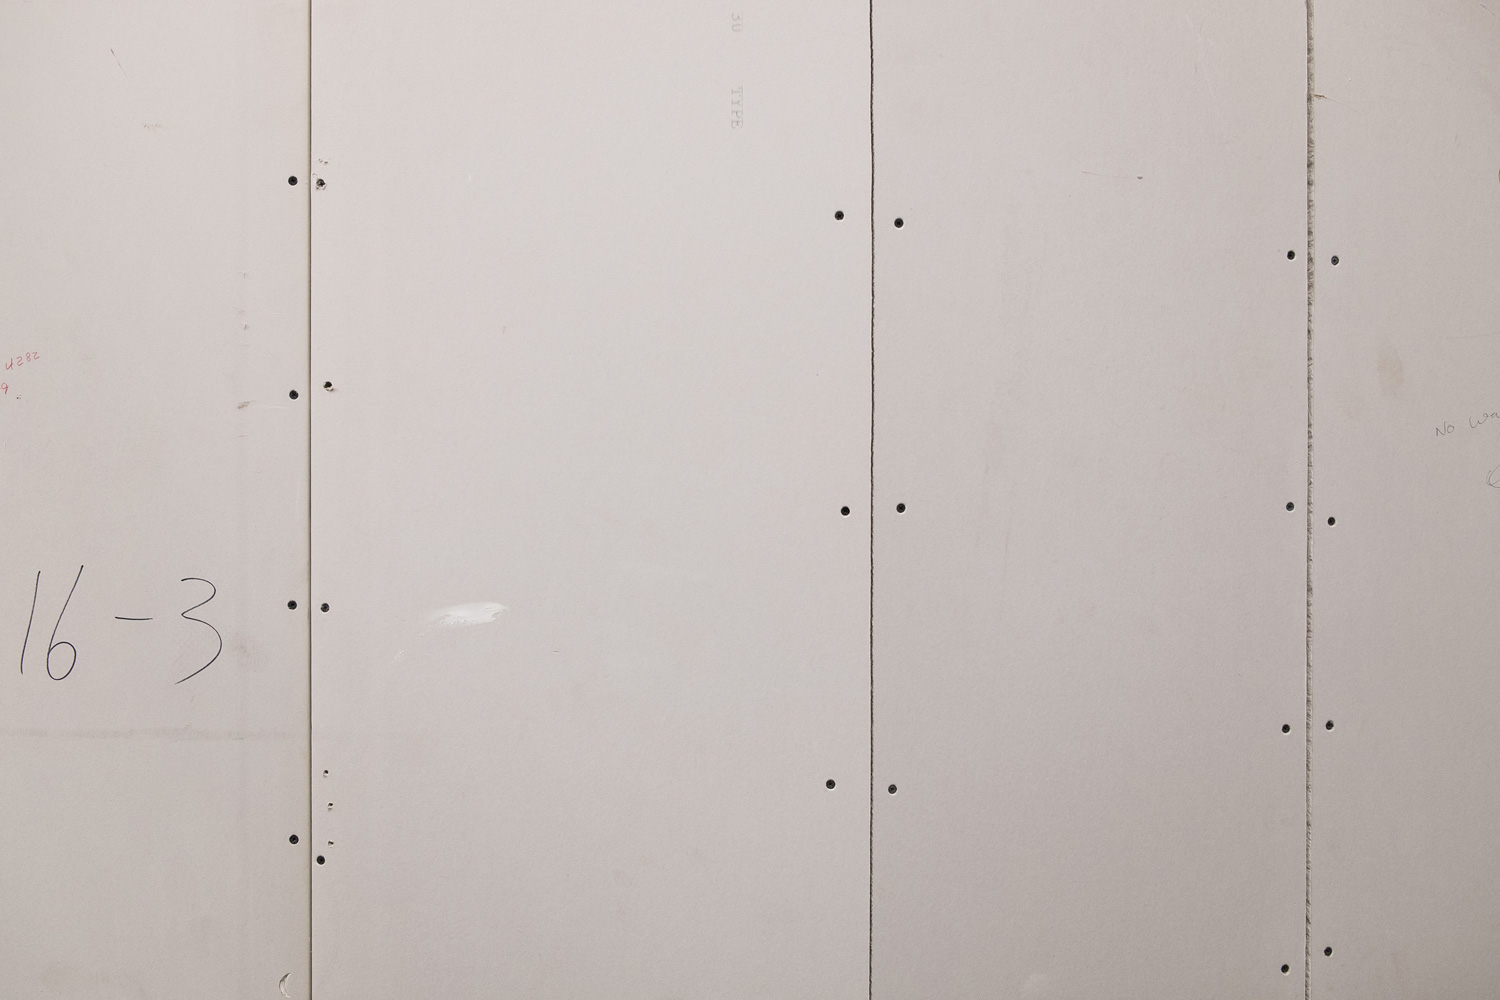 Unplastered drywall background with drywall screws.